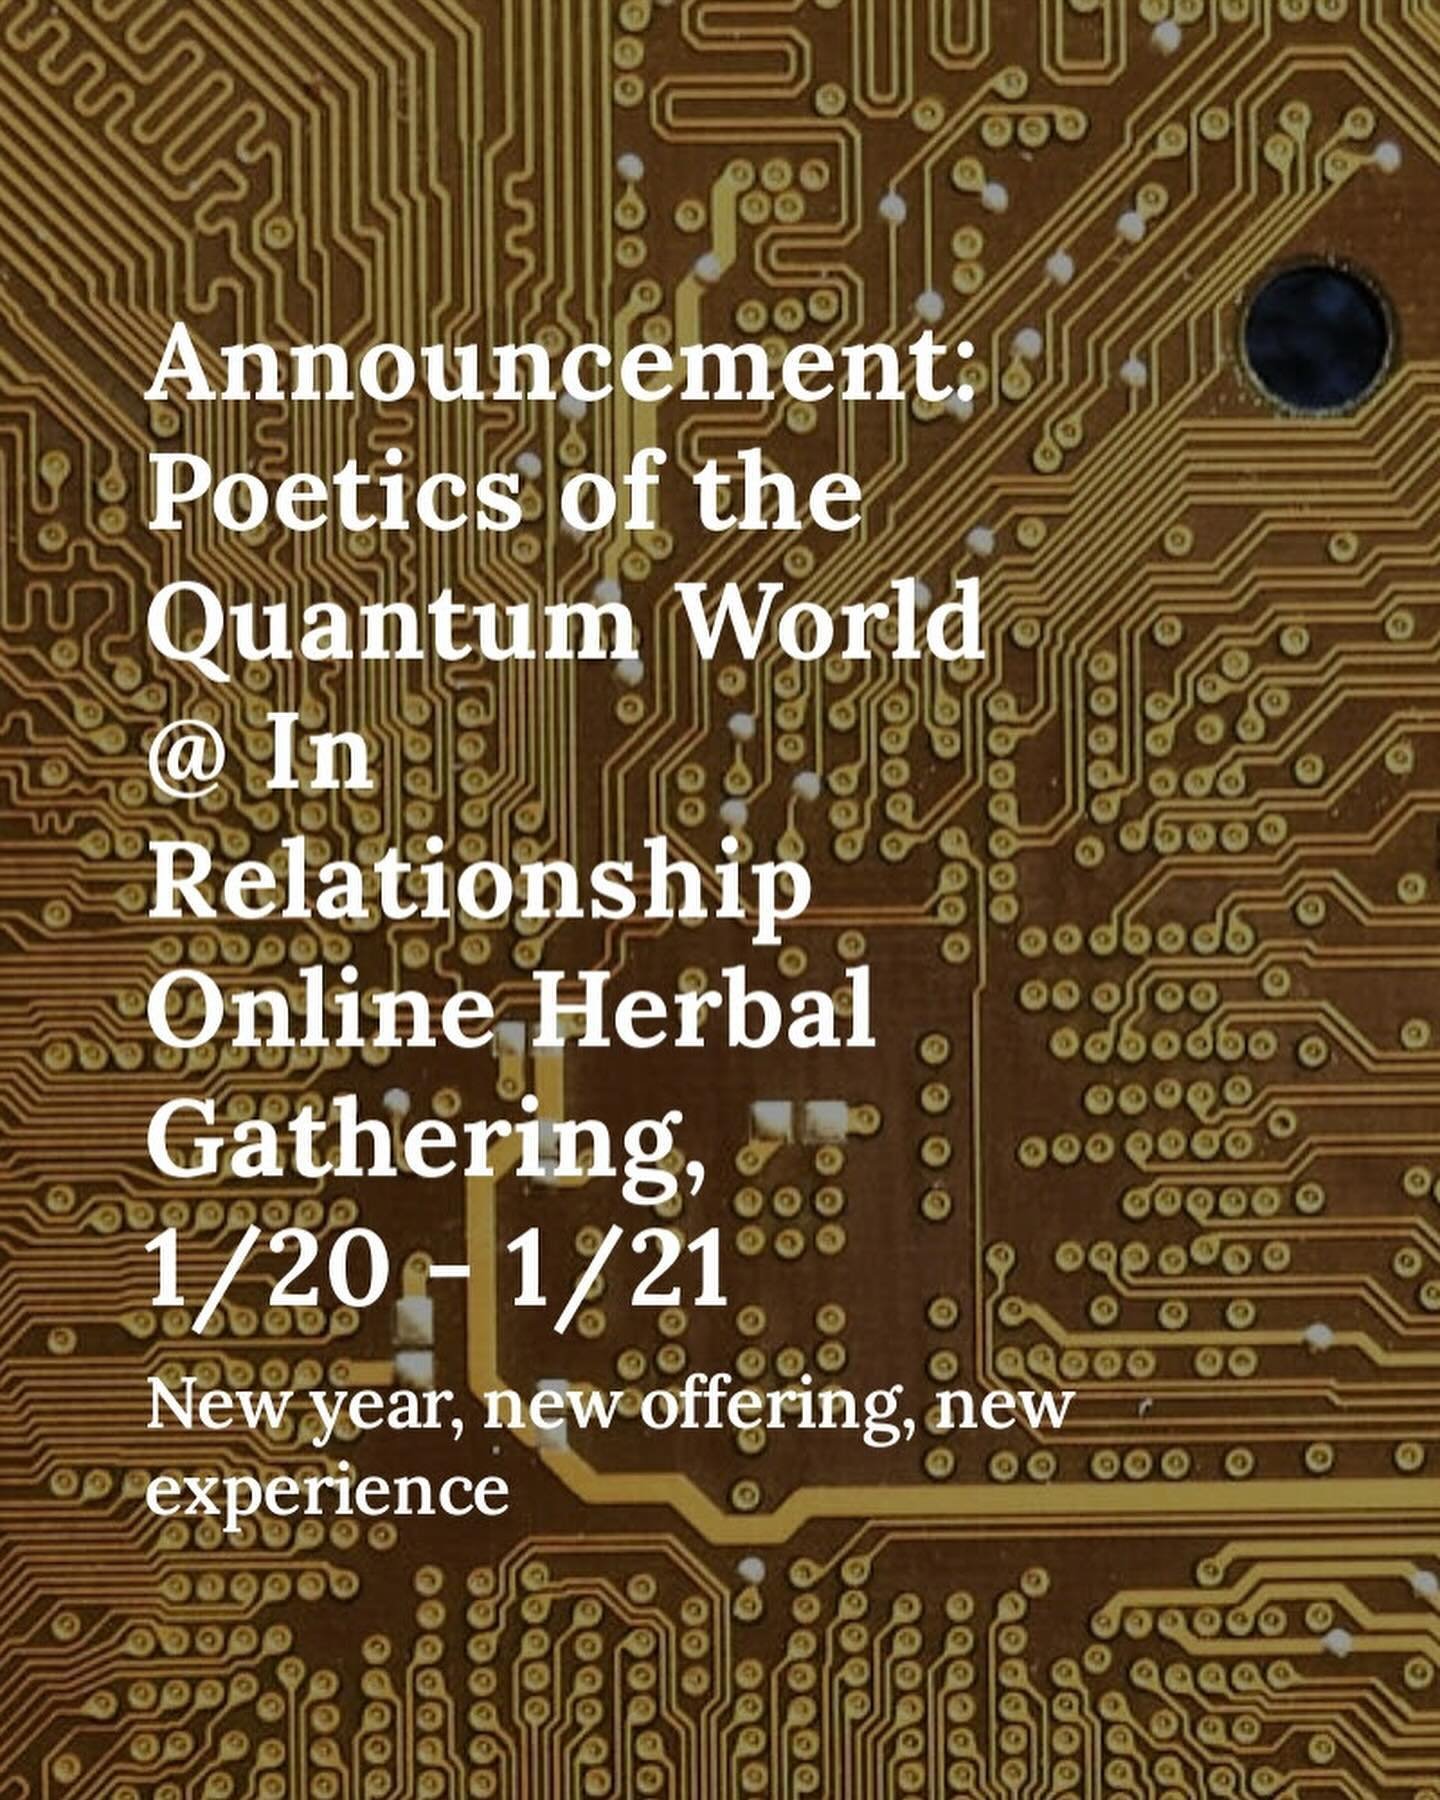 I&rsquo;m beyond thrilled to share my first public offering of the year, Poetics of the Quantum World. 🔭⚛️

This is a brand new offering, new experience for me and those who I&rsquo;ve shared space with, in this new year.

Poetics is an extended, aw